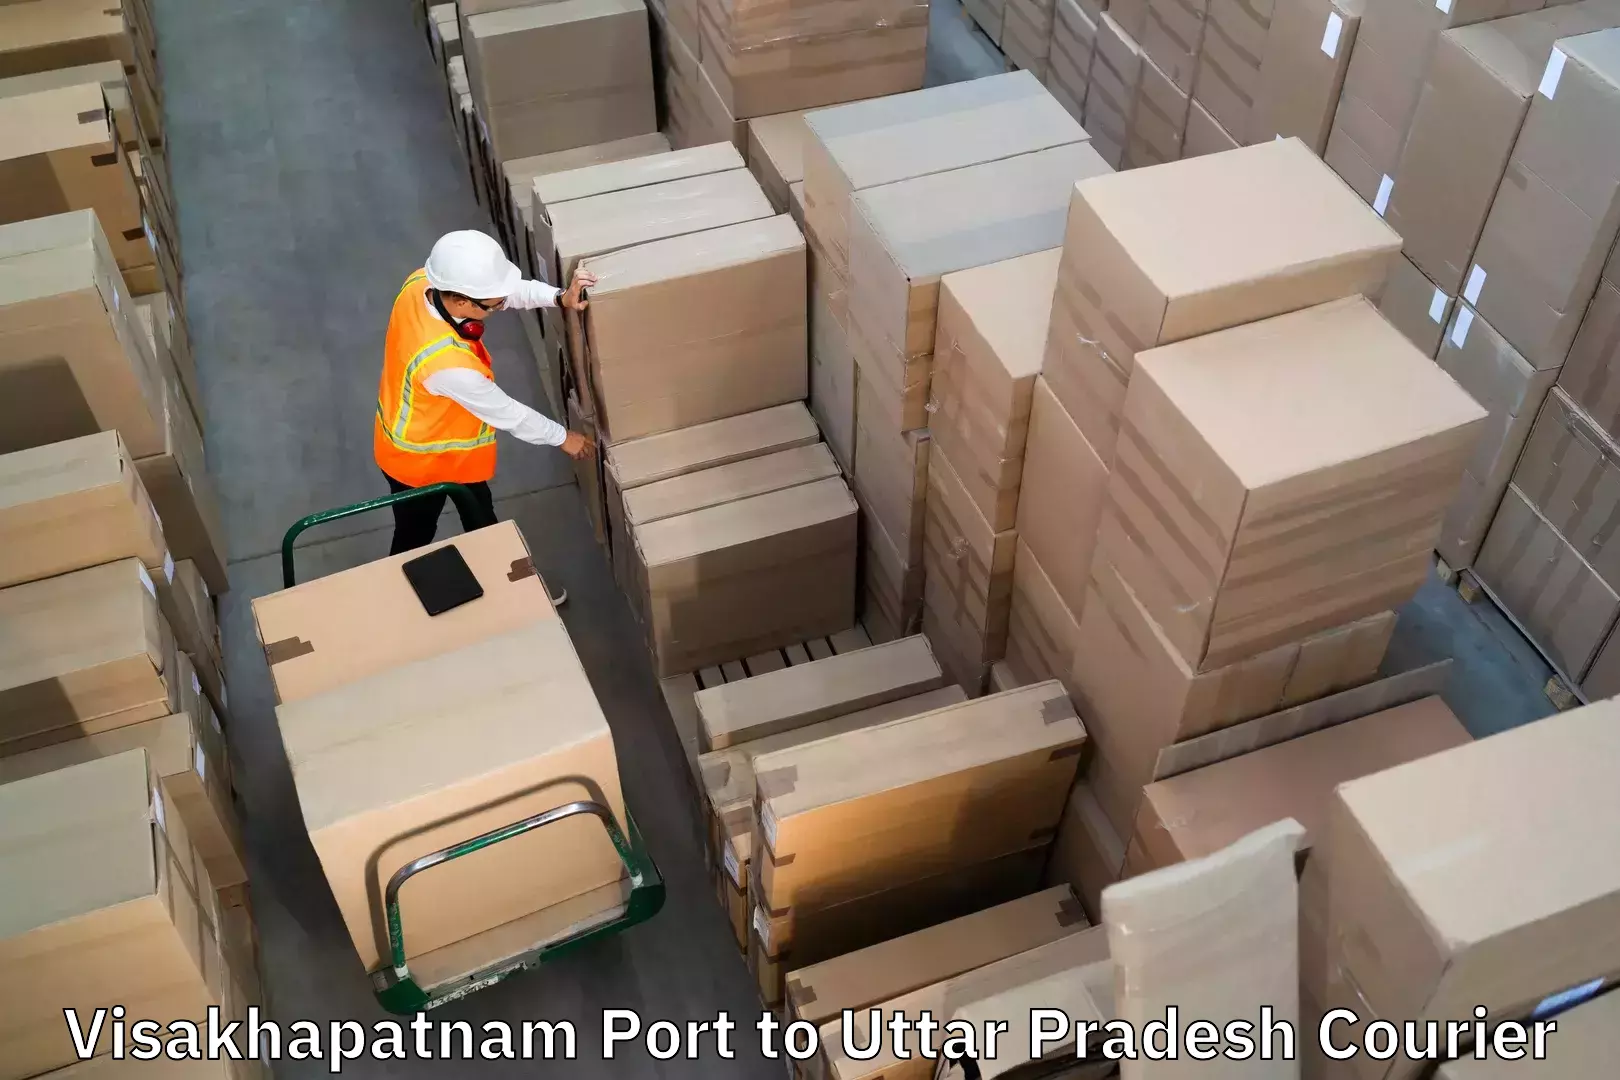 Luggage delivery providers Visakhapatnam Port to Mathura